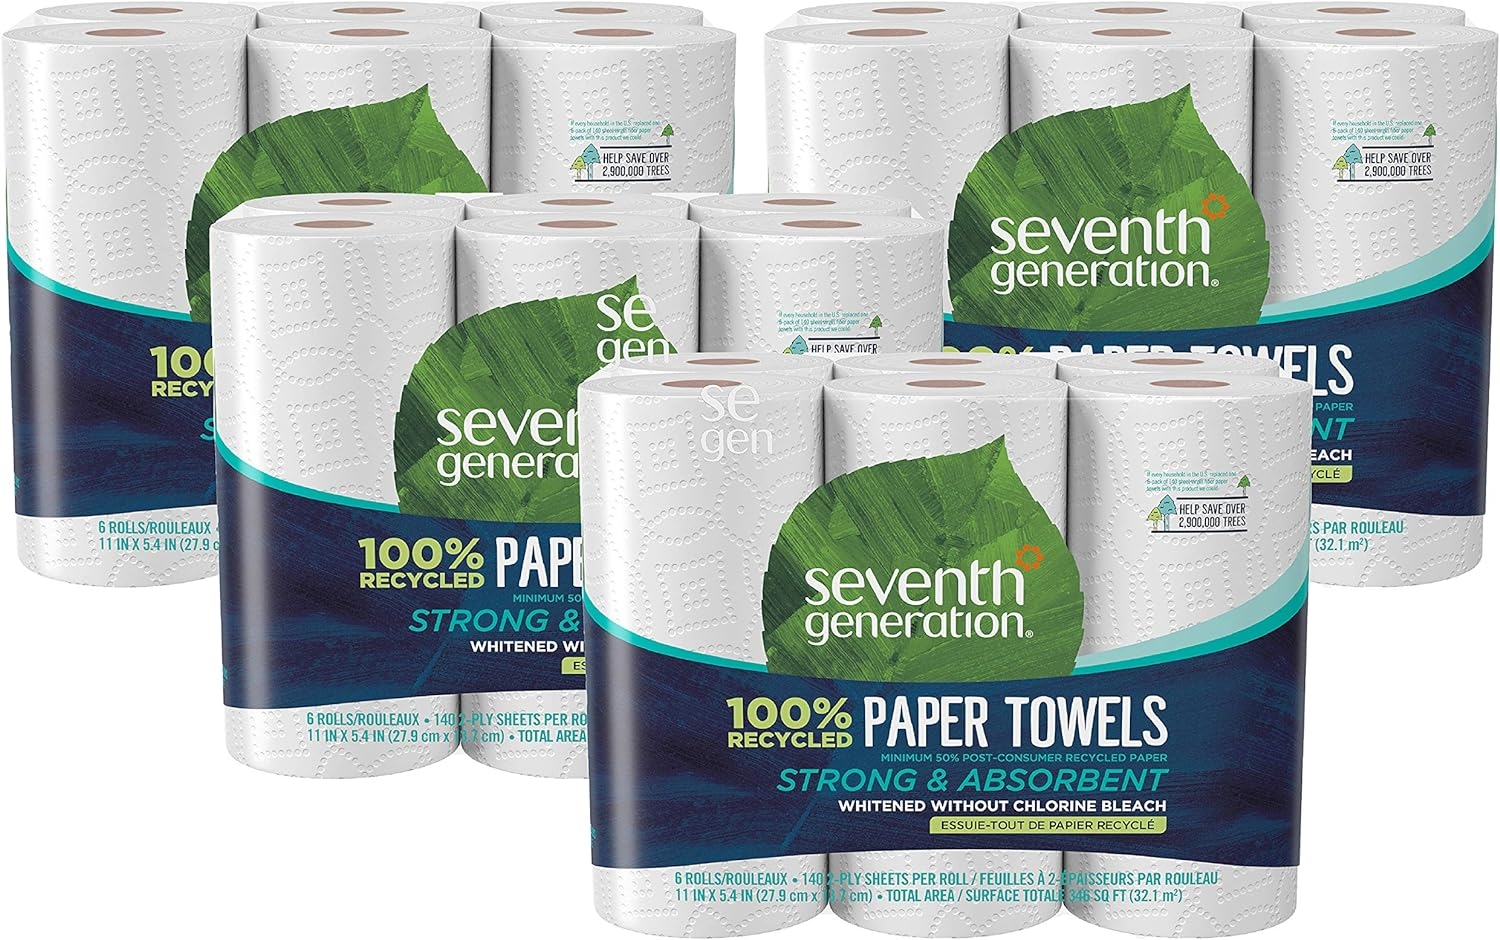 Seventh Generation Paper Towels, 100% Recycled Paper, 2-ply, 6-Count (Pack of 4)